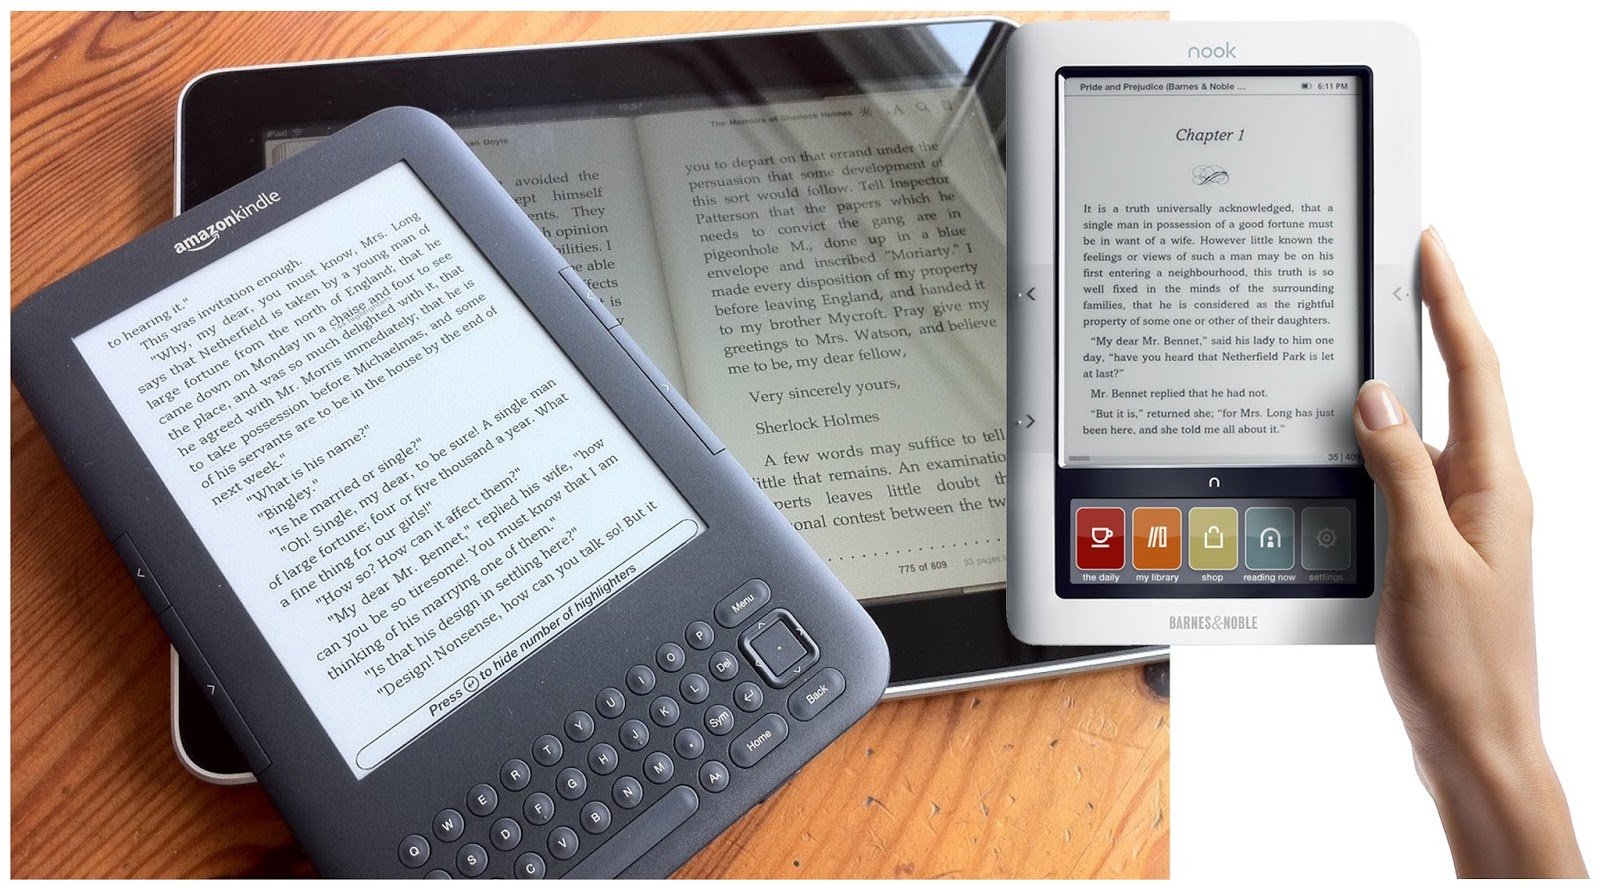 Tips for organizing and managing an e-book